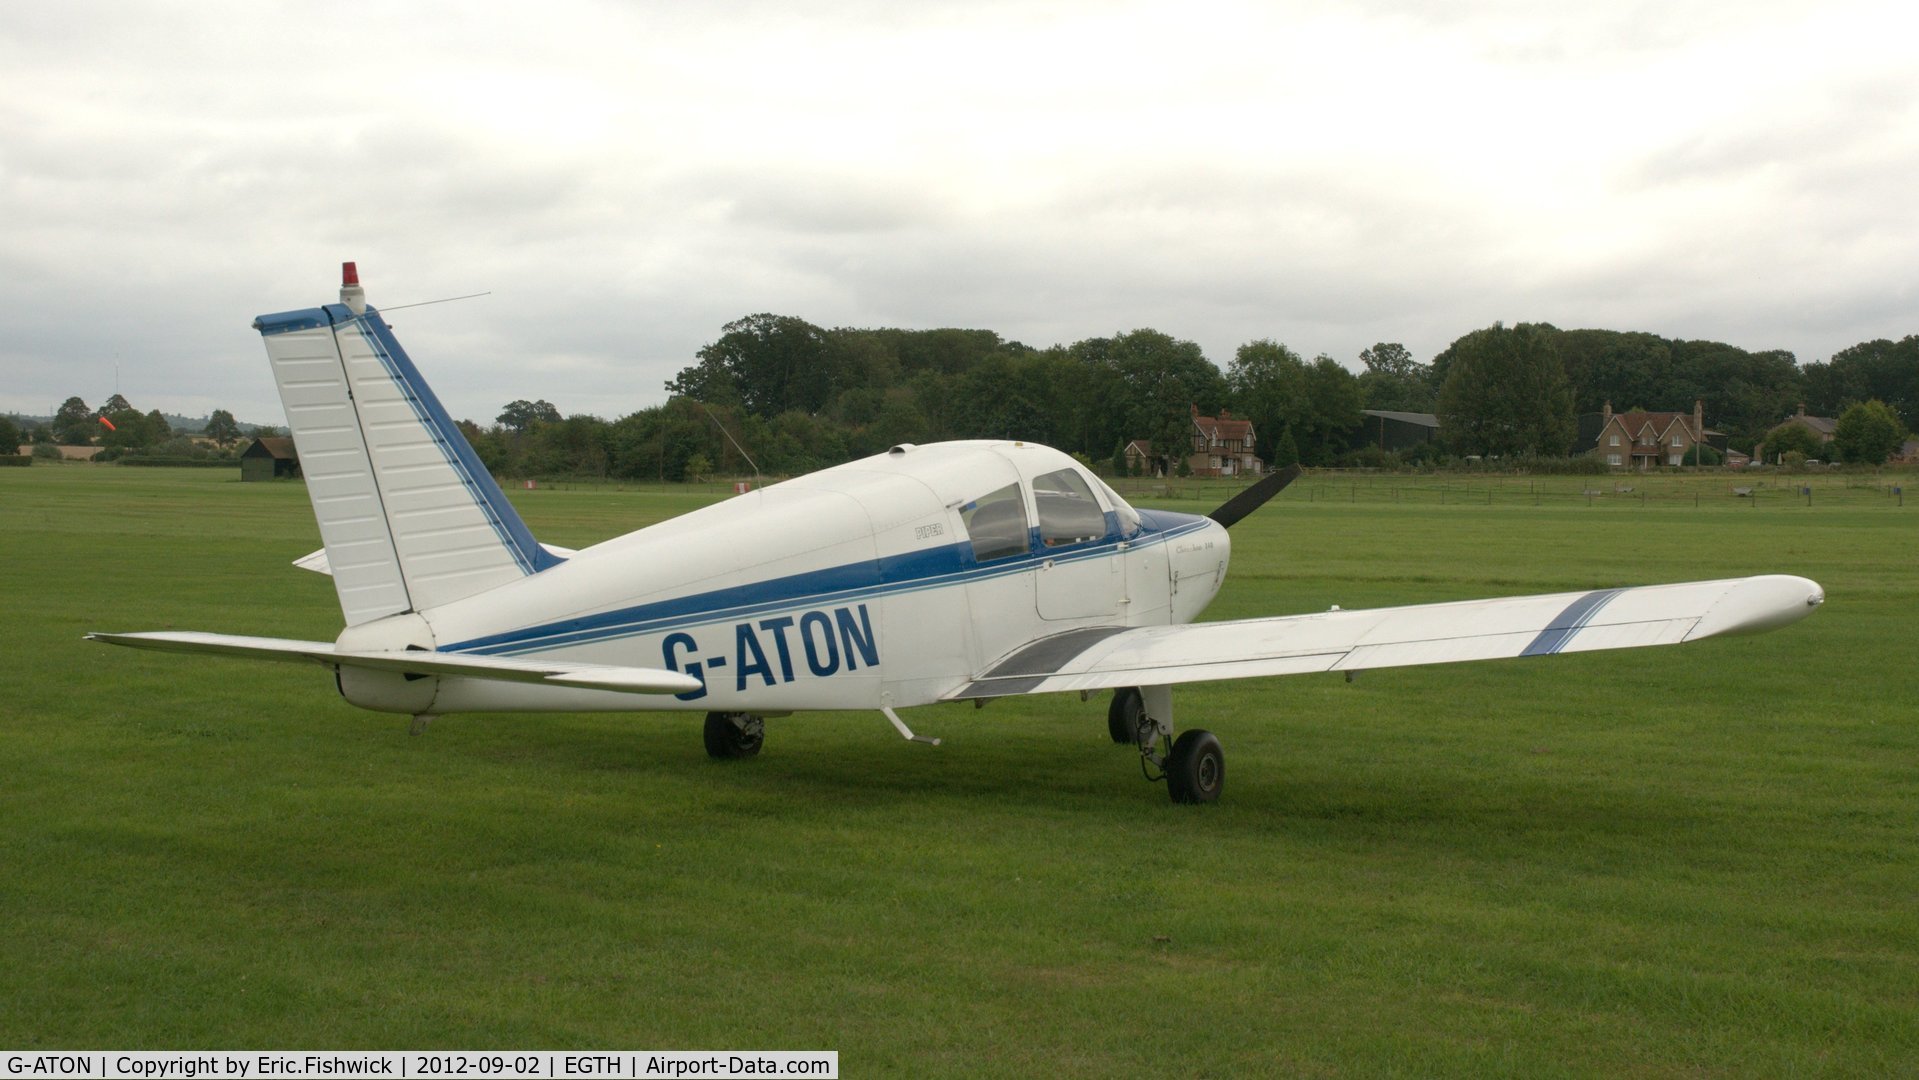 G-ATON, 1966 Piper PA-28-140 Cherokee C/N 28-21654, 2. G-ATON at Shuttleworth Pagent Air Display, Sept. 2012.